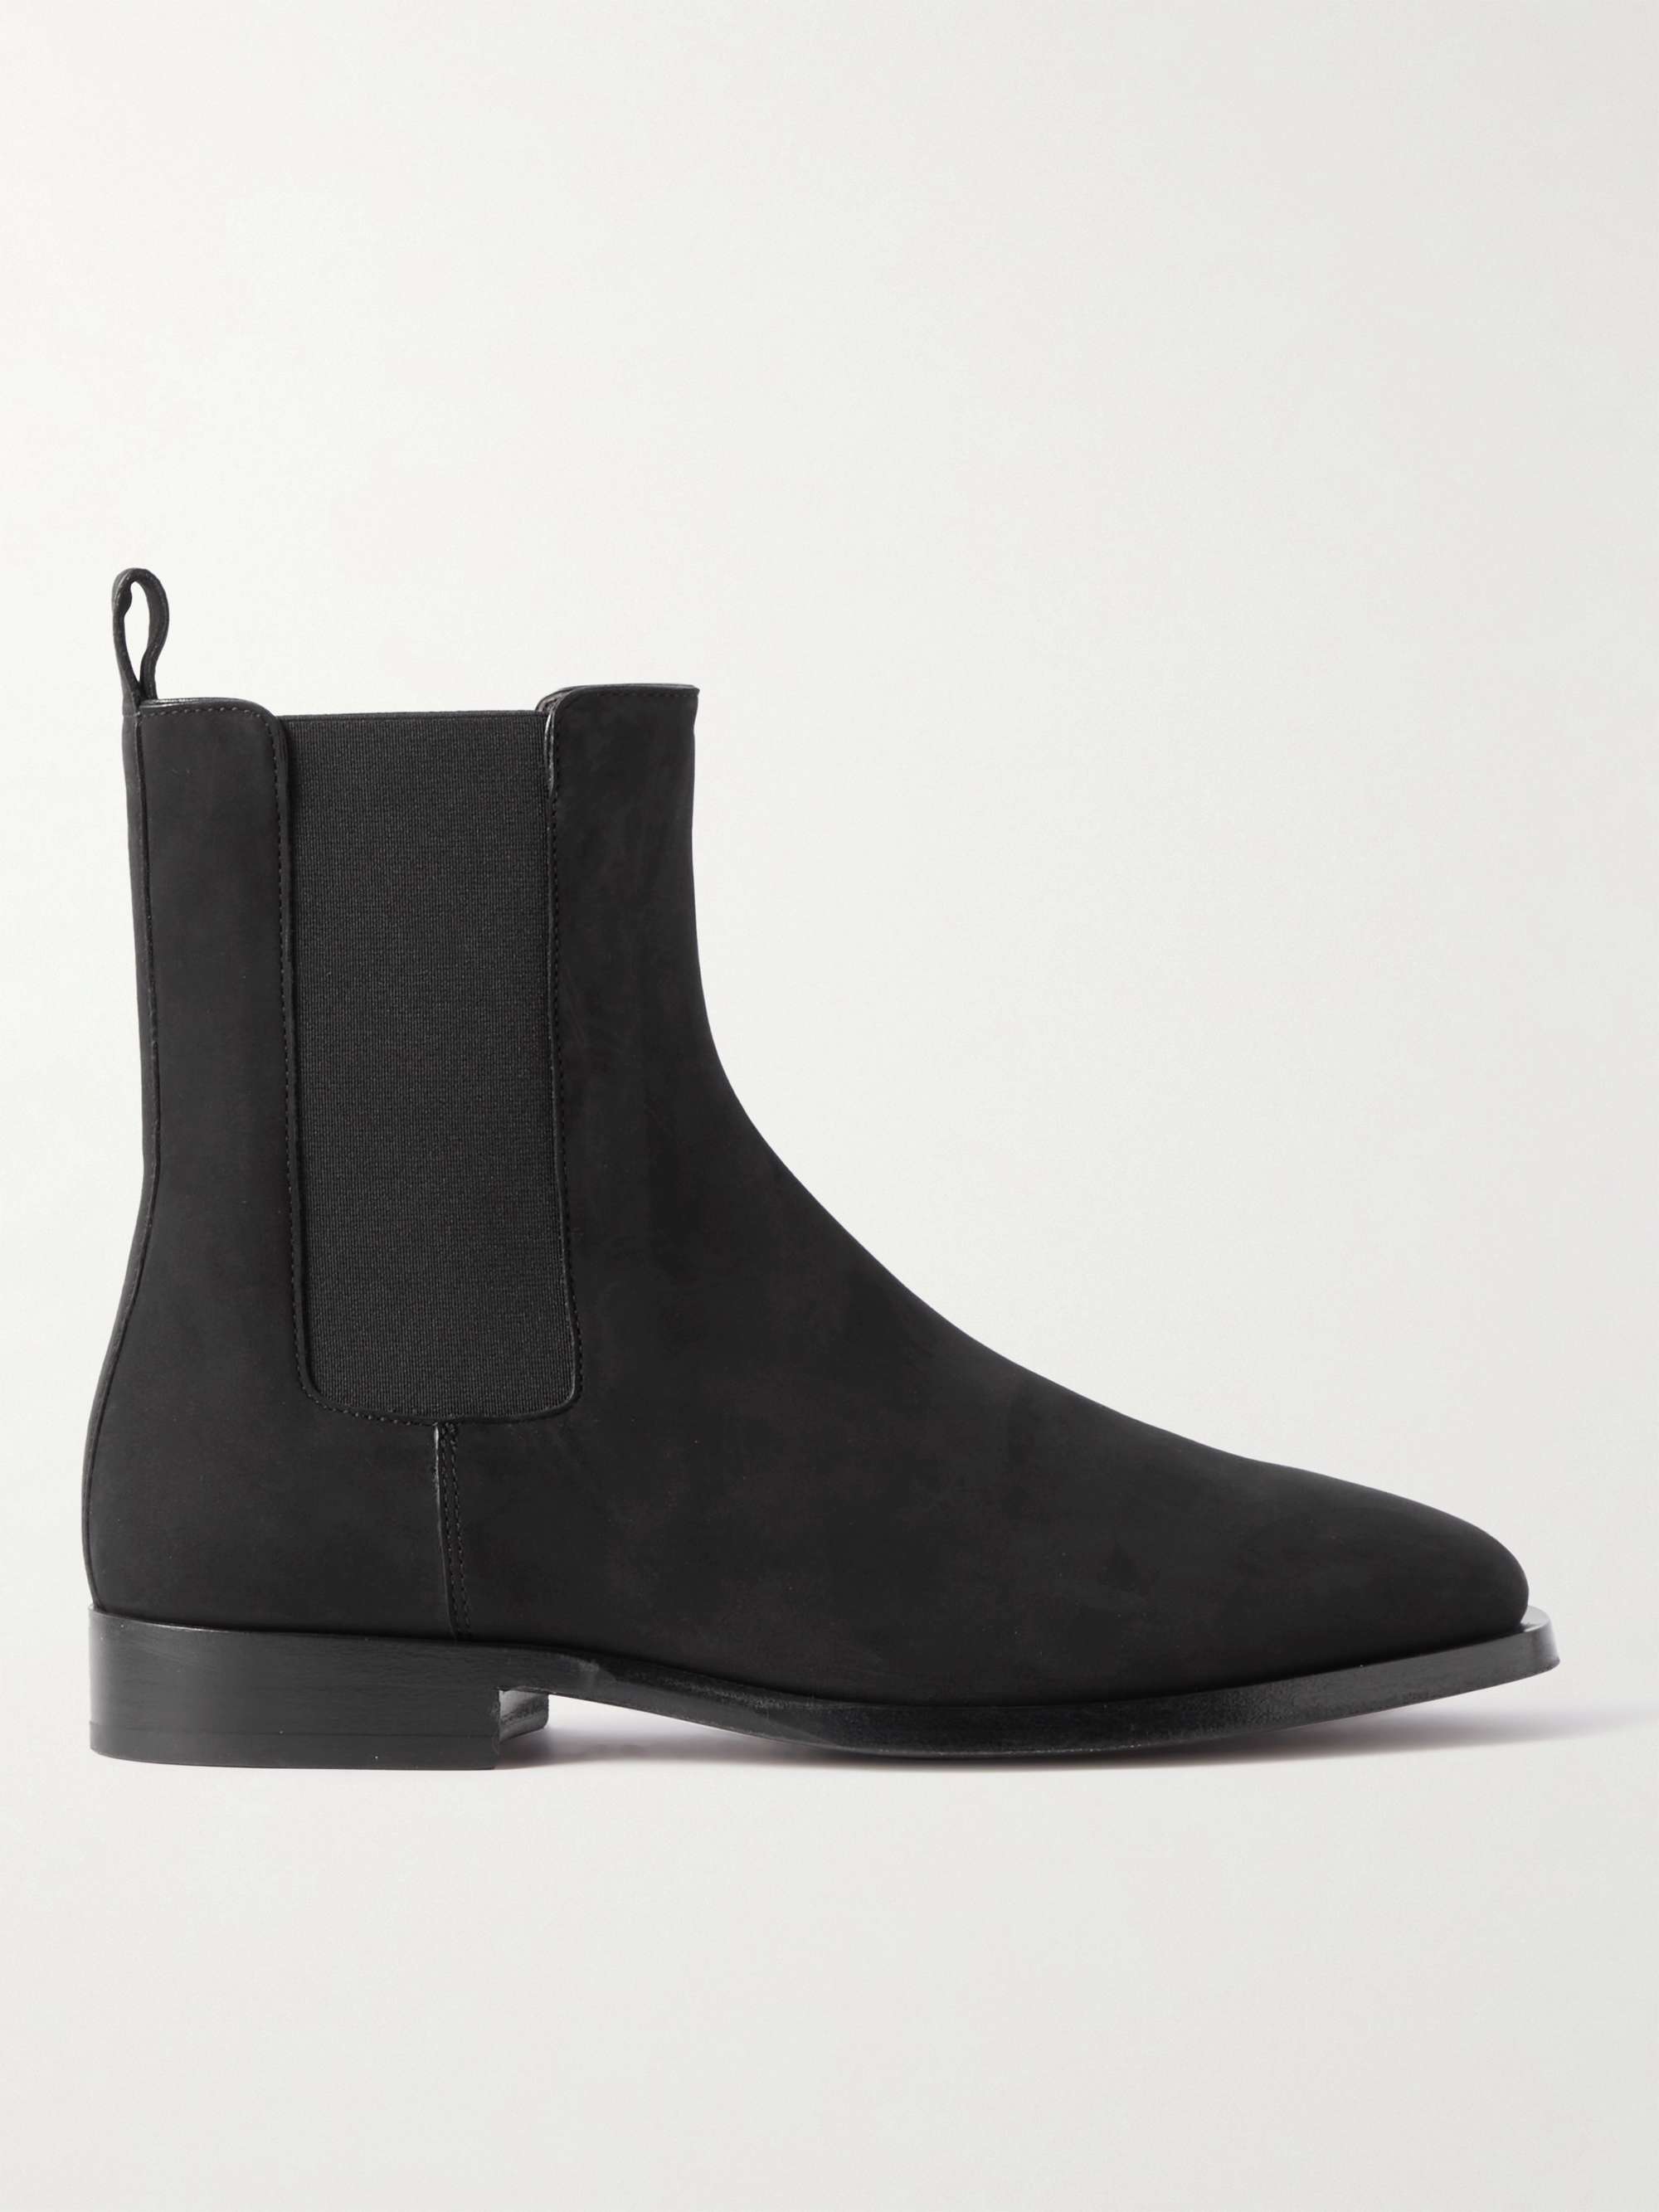 Black Grunge Suede Chelsea Boots | THE ROW | MR PORTER